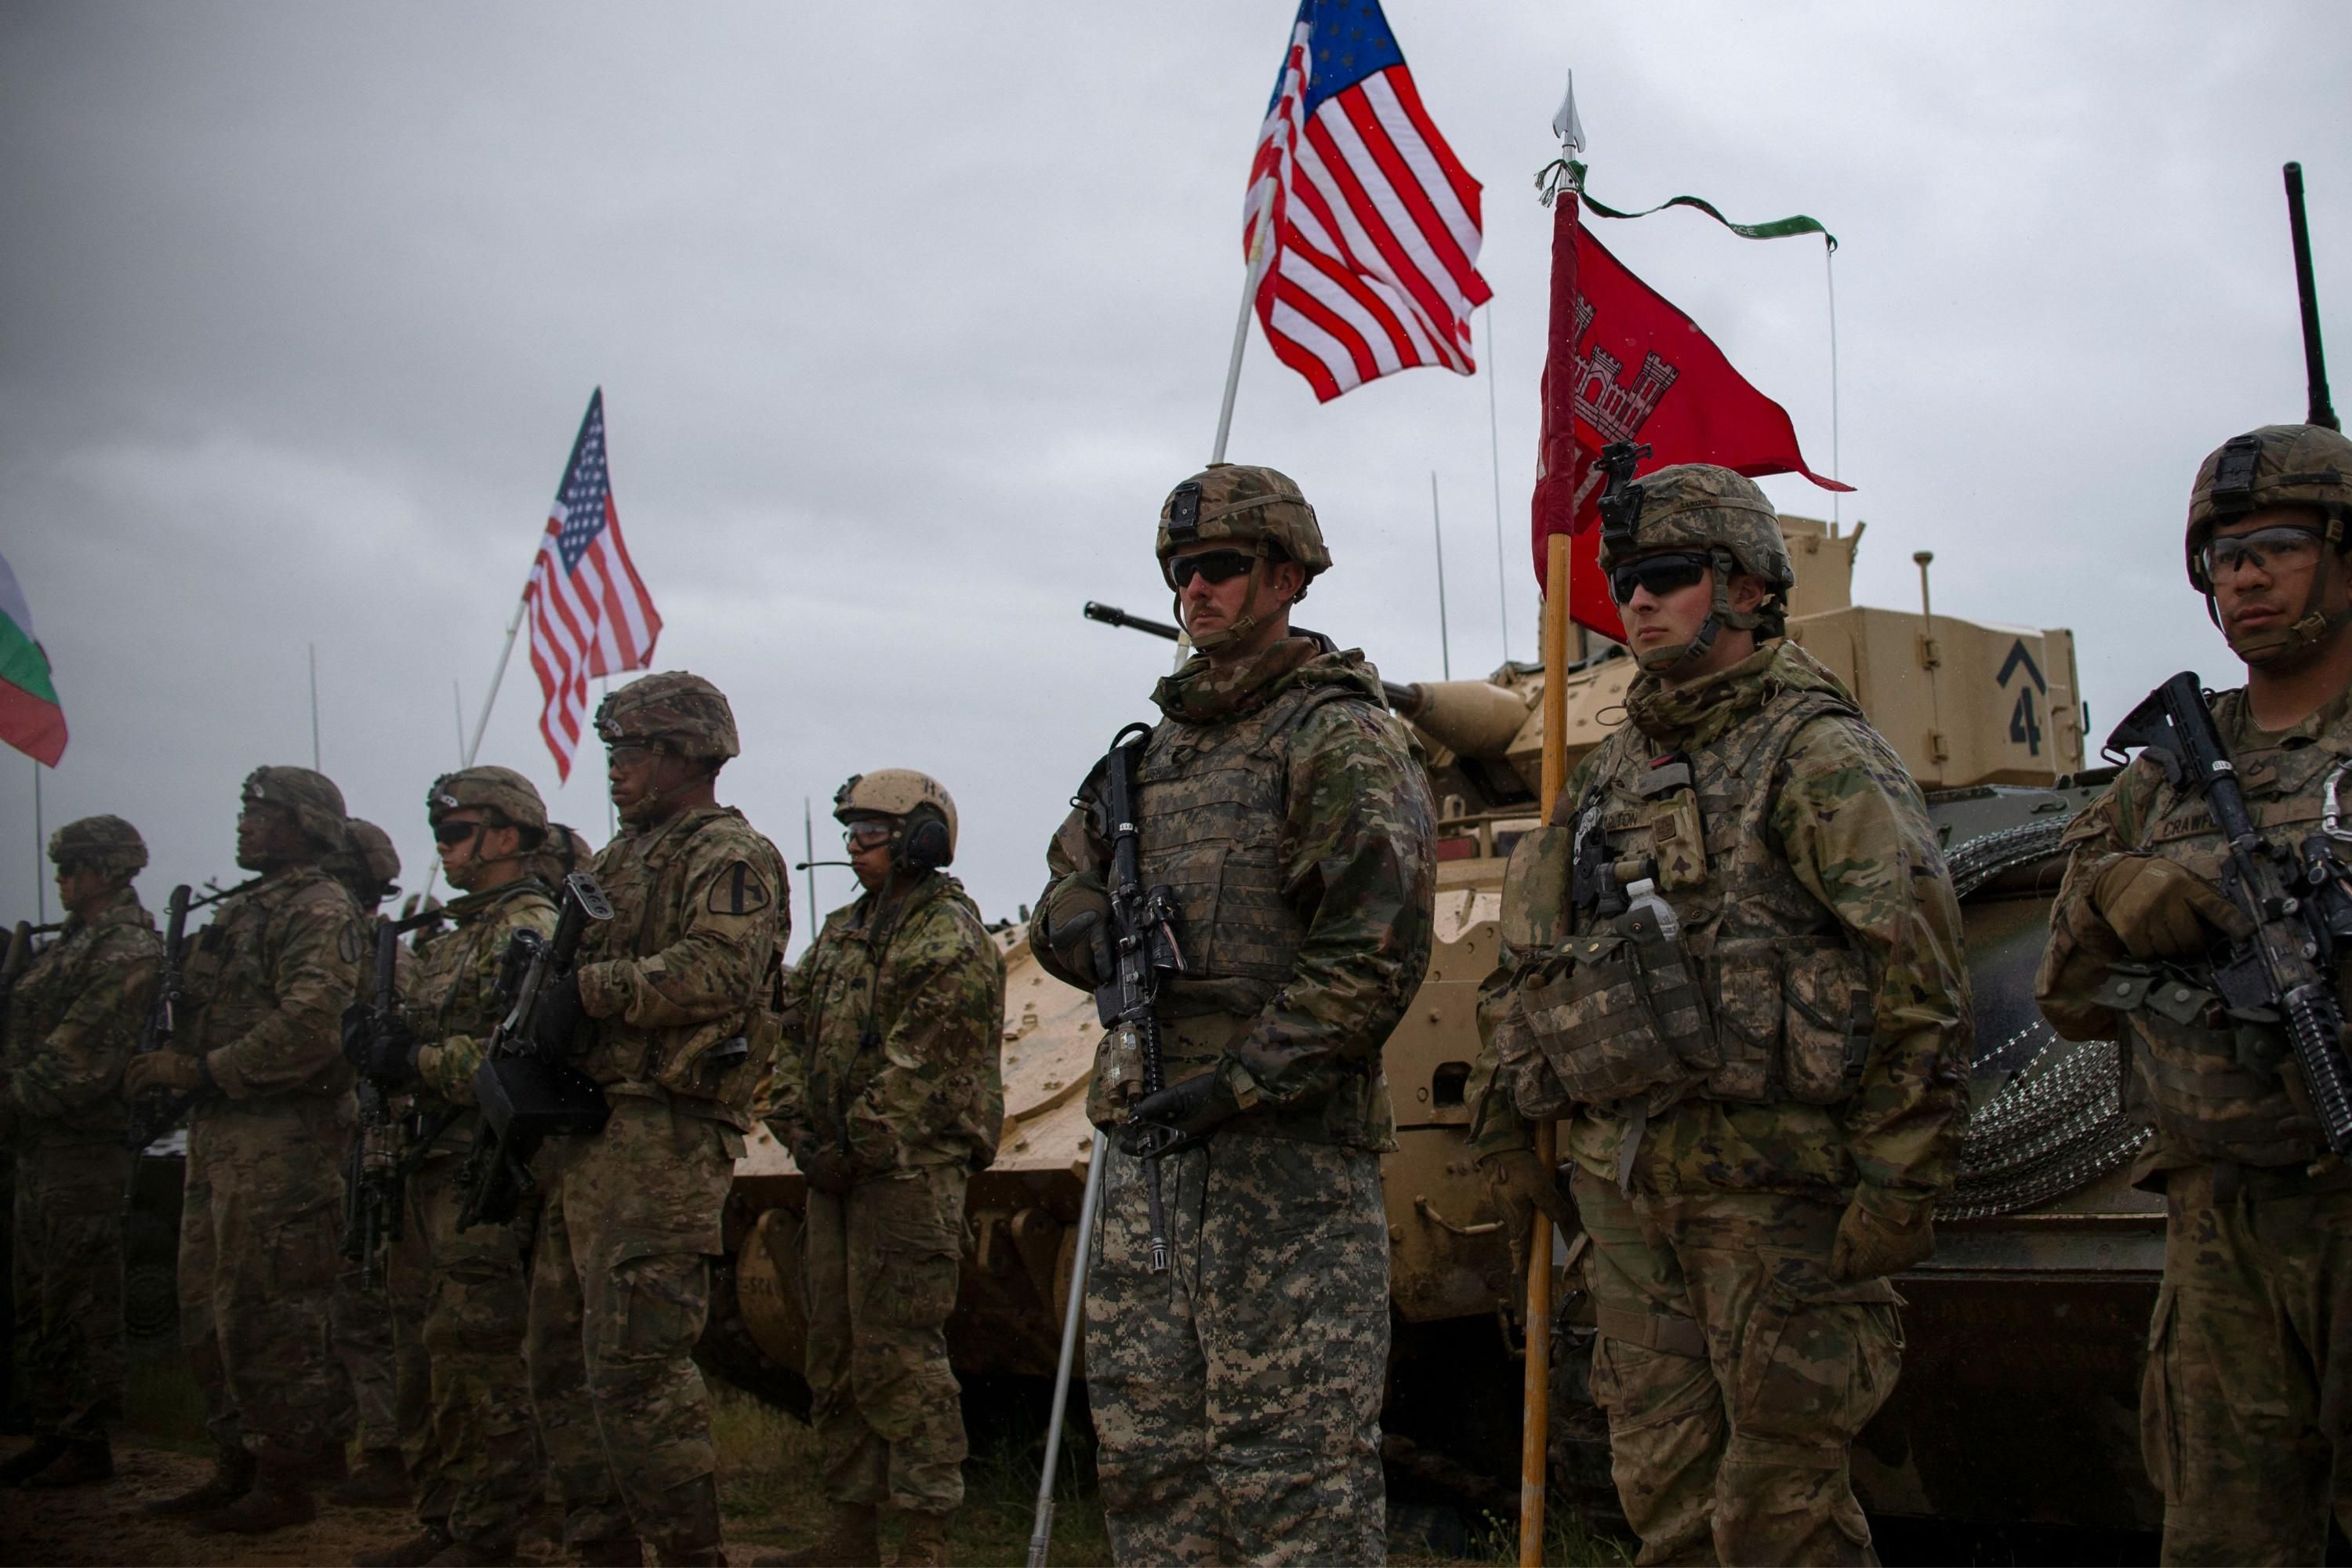 U.S. soldiers take part in a training exercise